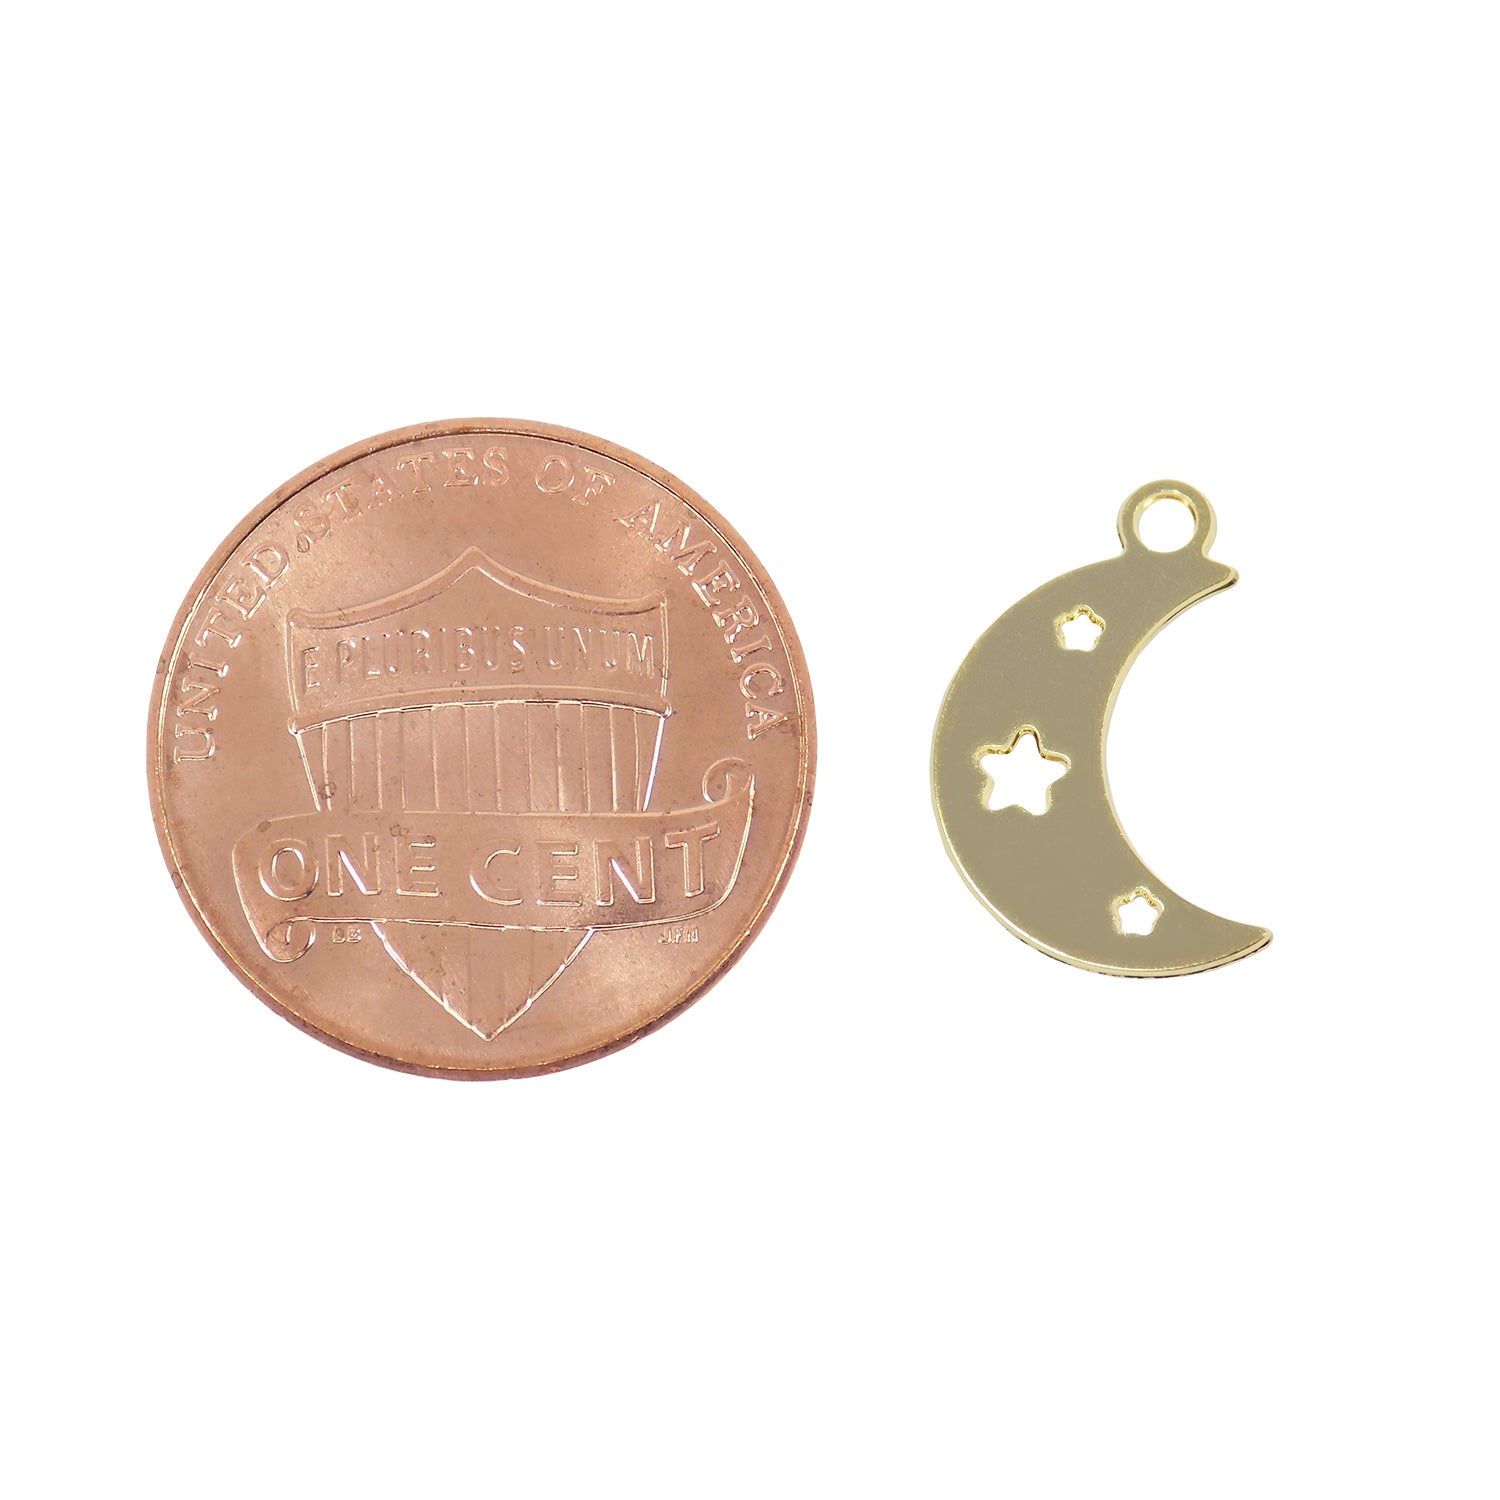 Moon Star Charm (06 Pieces) Gold Filled Moon pendant with Star, Celestial Pendant 18k Gold Plated over Brass, Wholesale Jewelry Findings